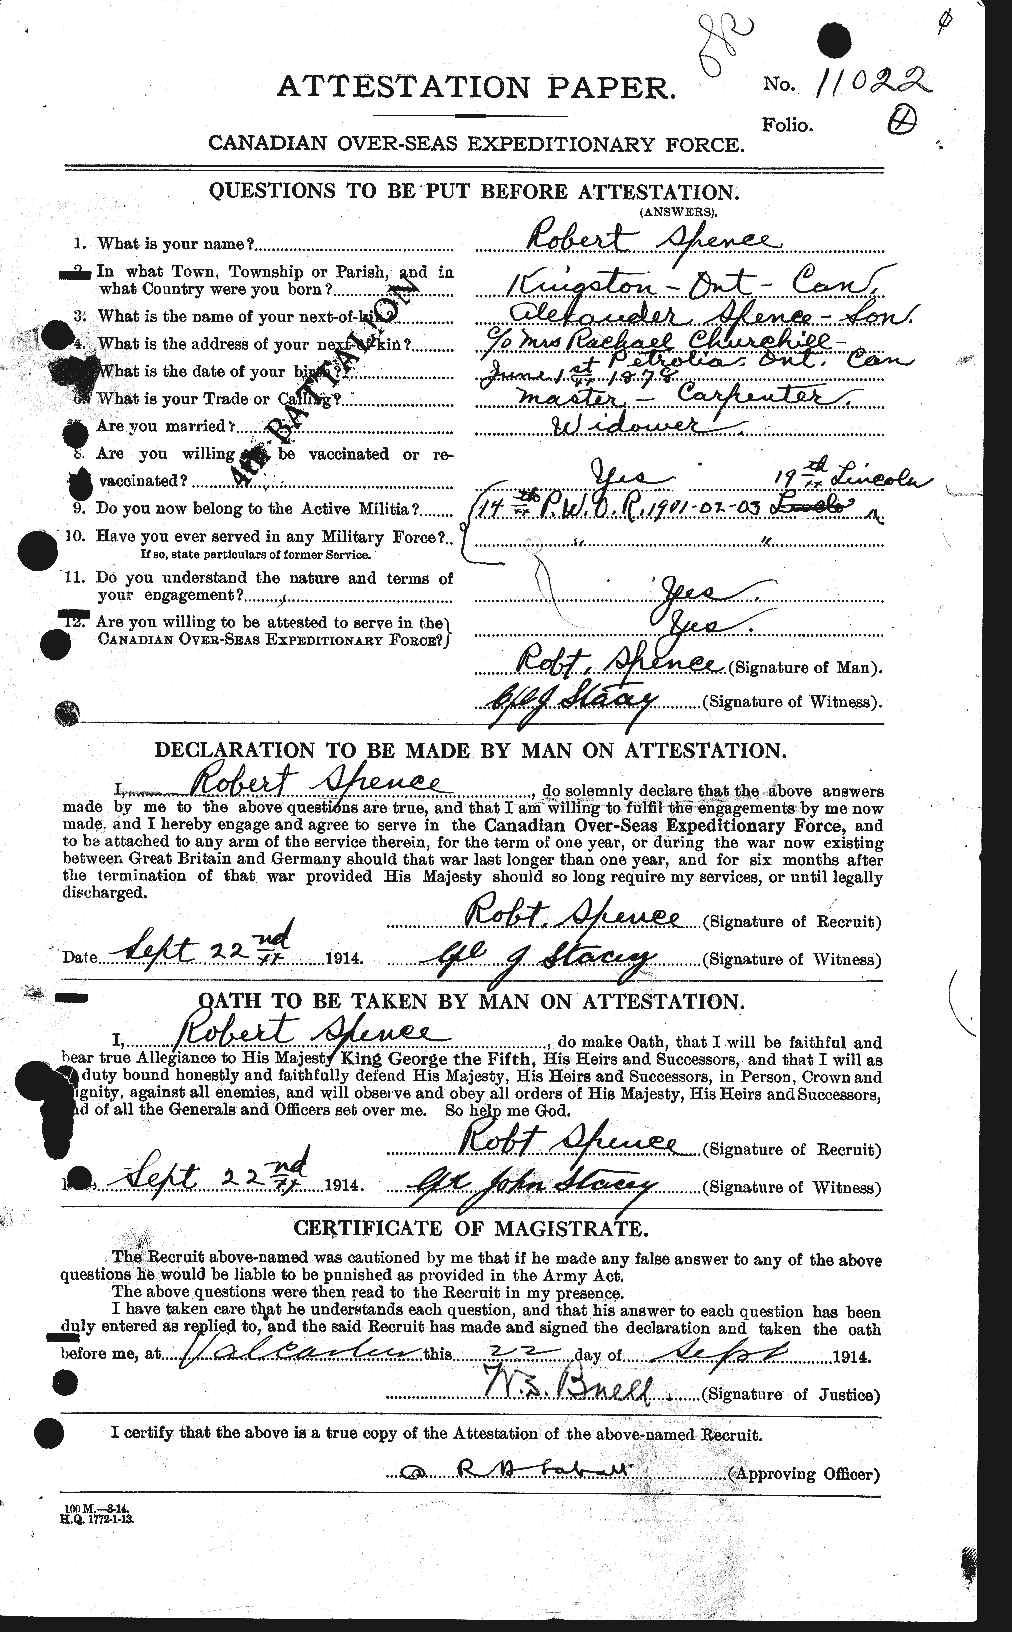 Personnel Records of the First World War - CEF 621411a